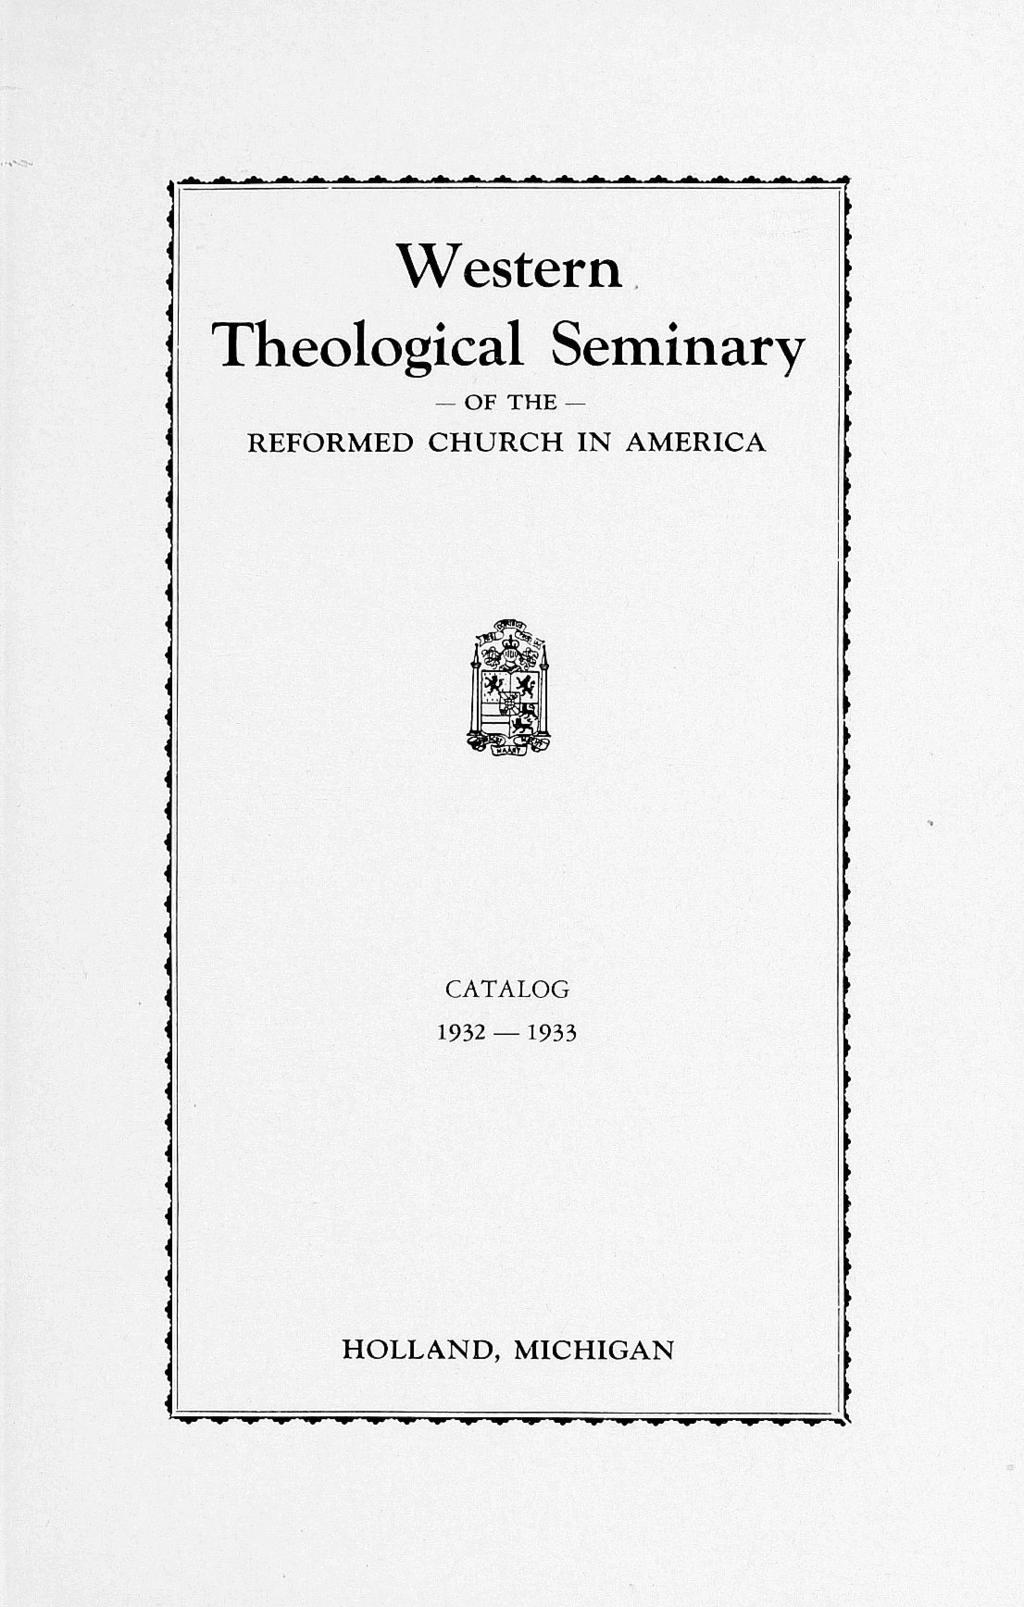 Western Theological Seminary OF THE REFORMED